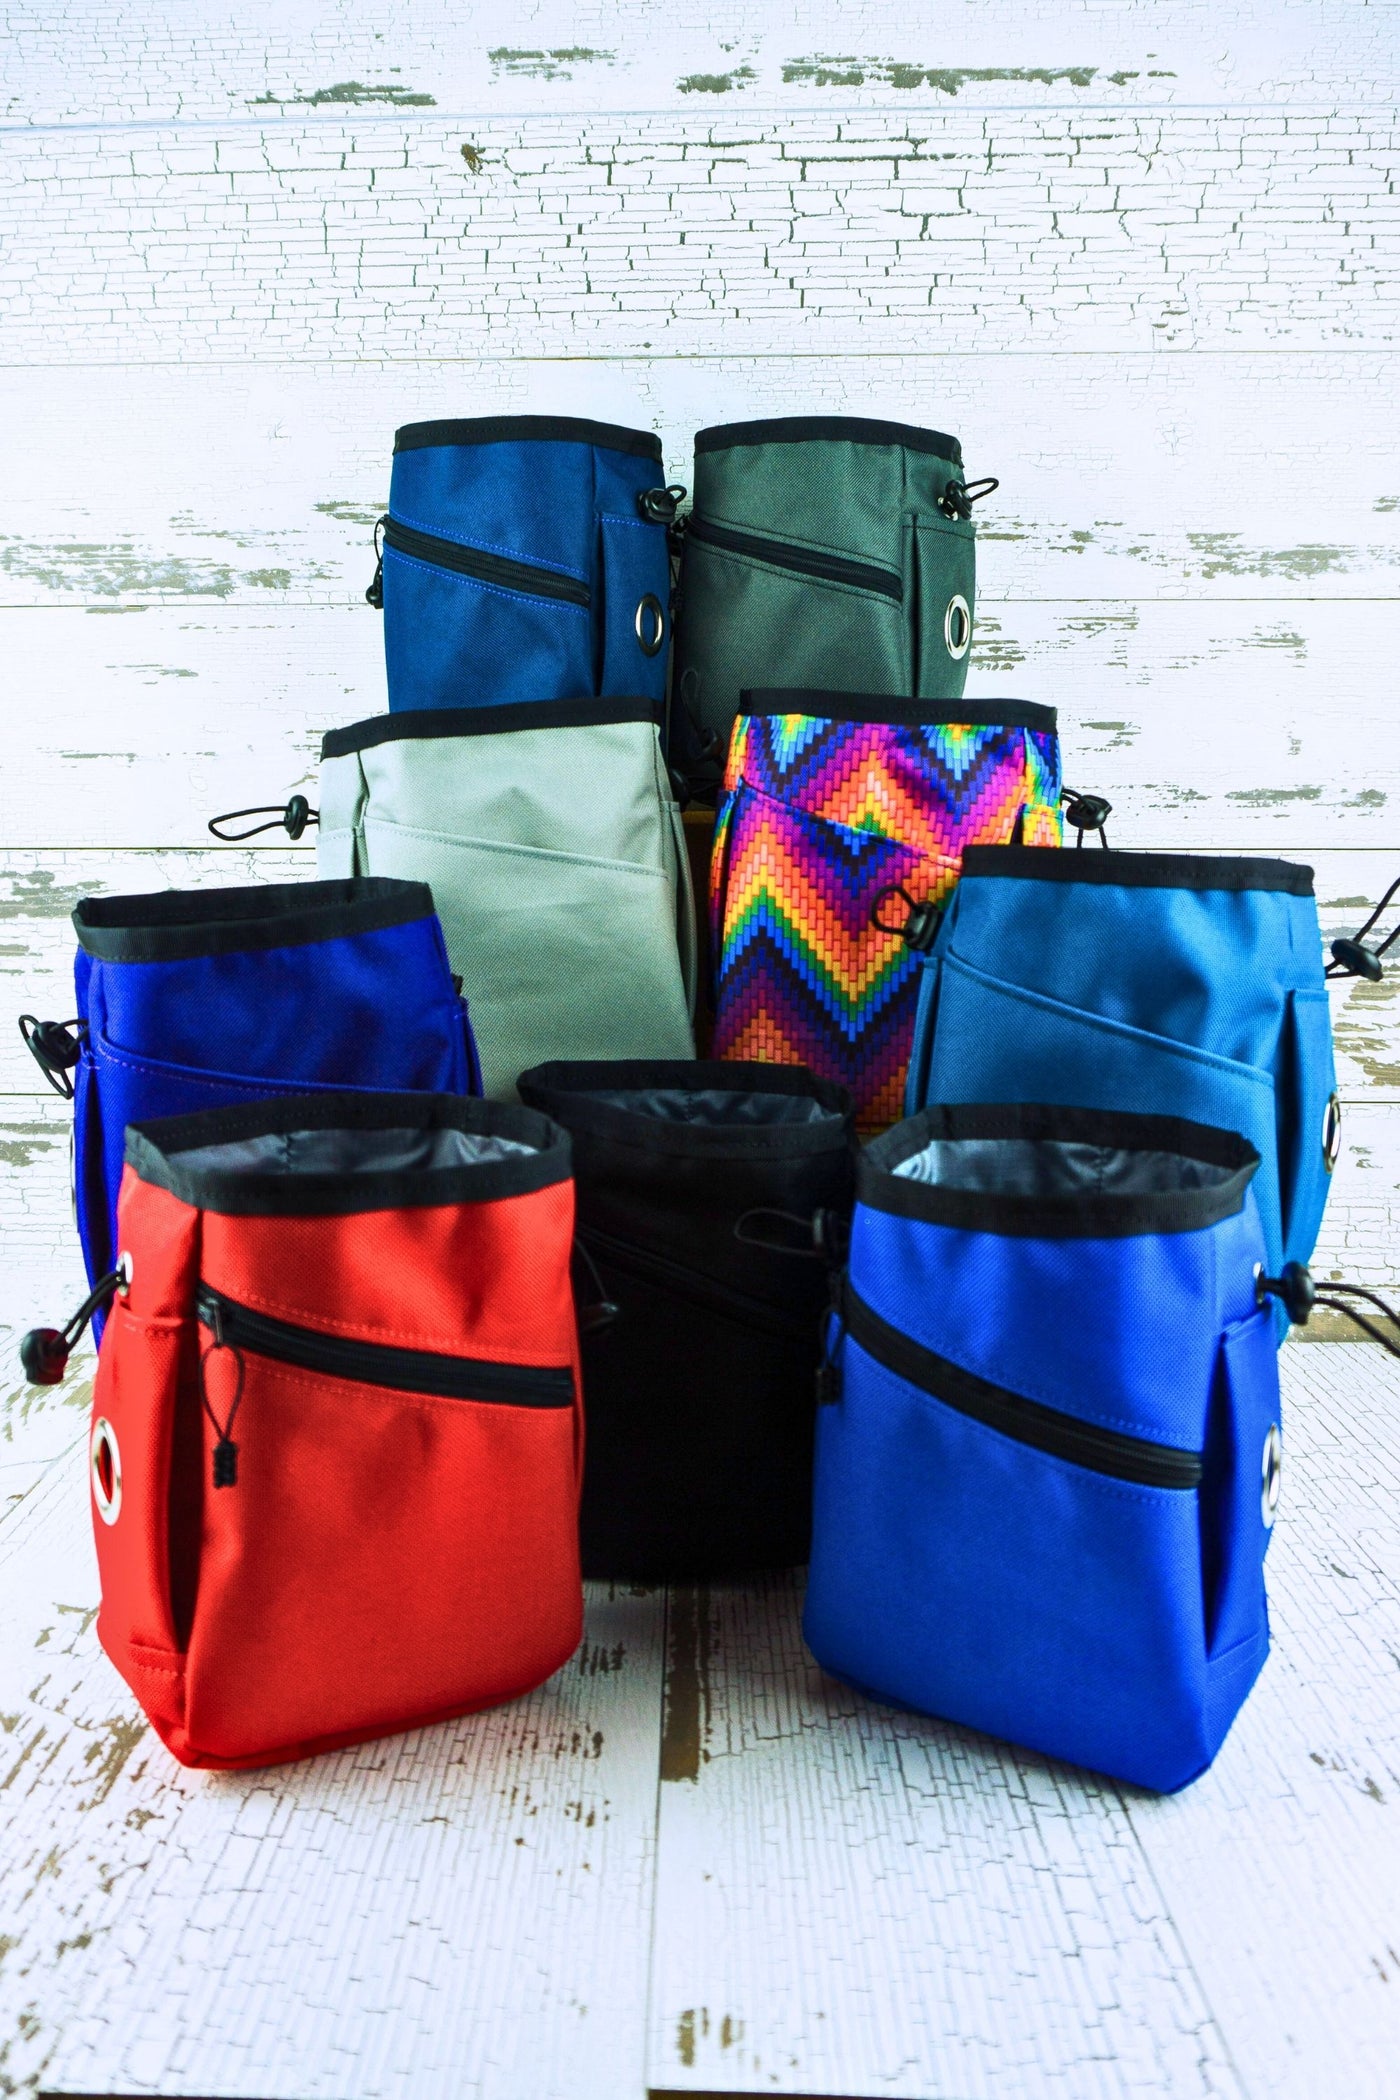 Nine colors of waterproof nylon canvas are available to choose from in this training treat pouch with waste bag dispensers. The colors are black, royal blue, navy blue, red, gray, silver, teal, purple, or a multicolored prism pattern.